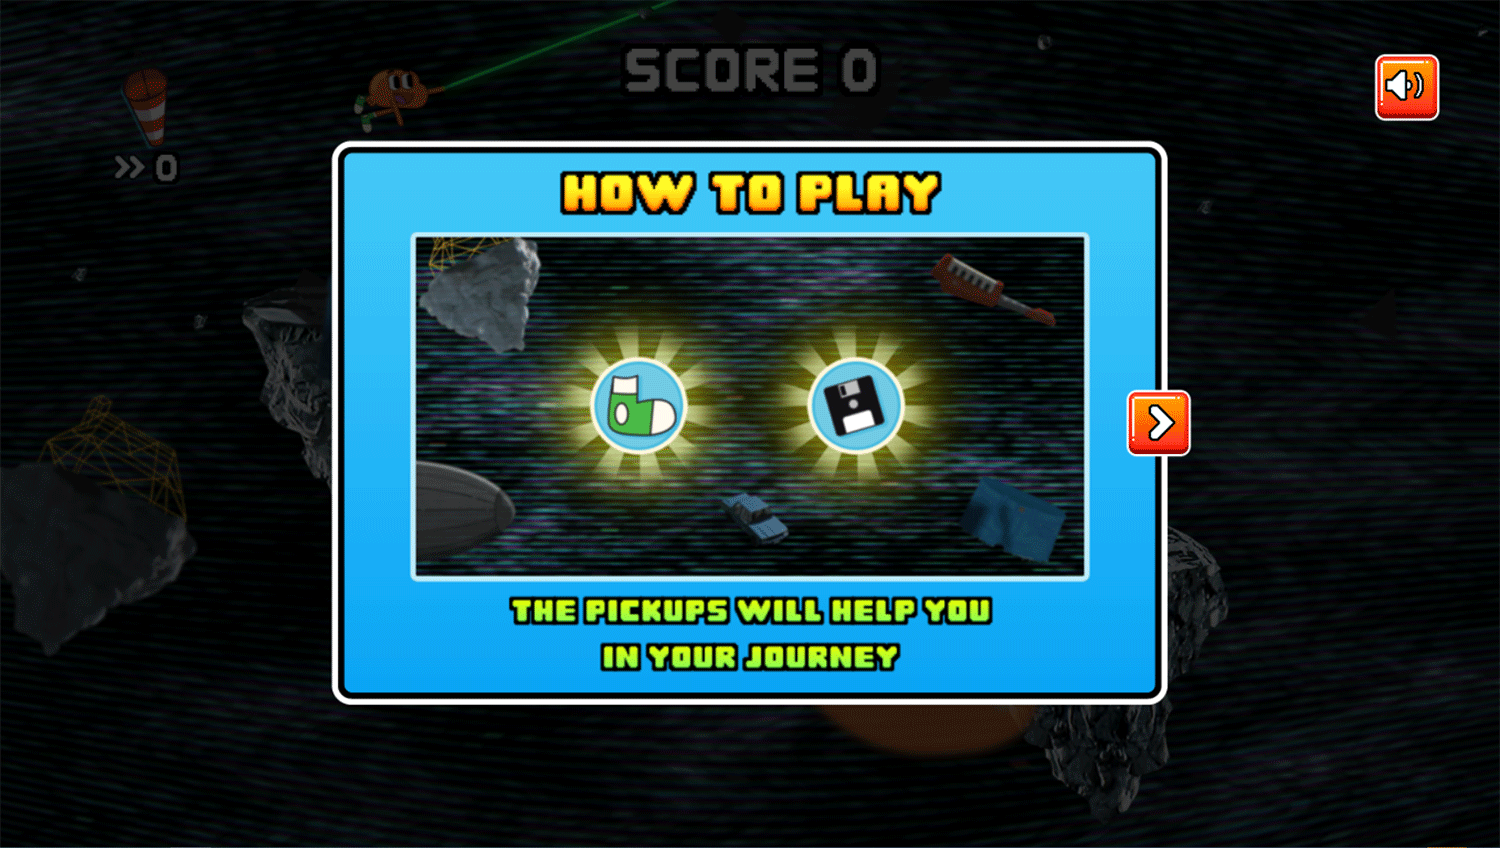 Amazing World of Gumball Swing Out Game Play Tips Screenshot.